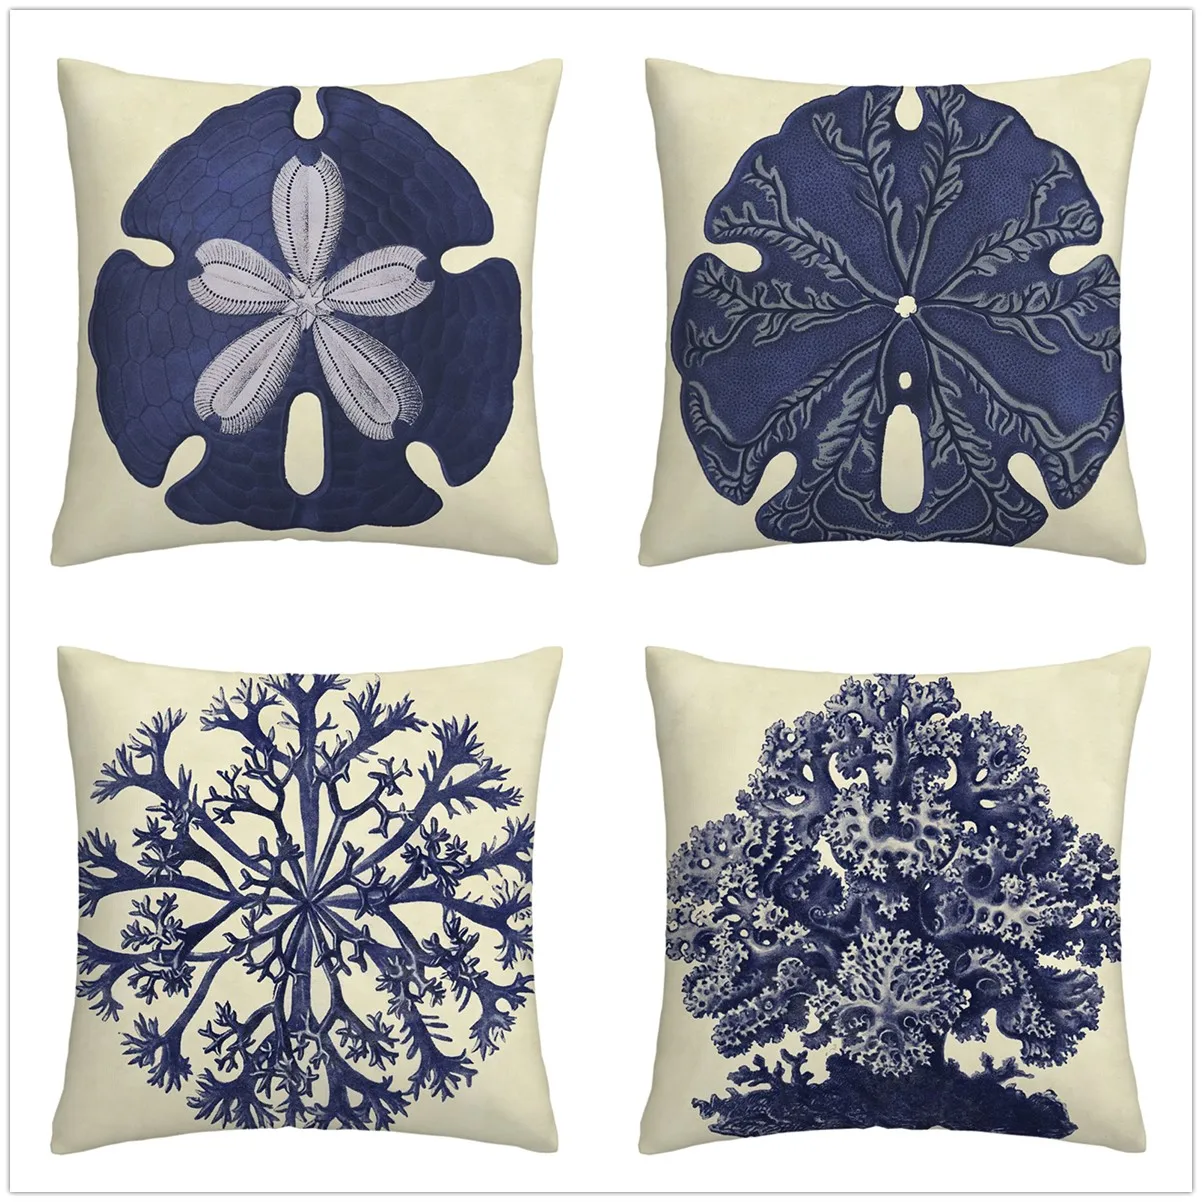 

Blue coral starfish retro linen pillowcase sofa cushion cover home decoration can be customized for you